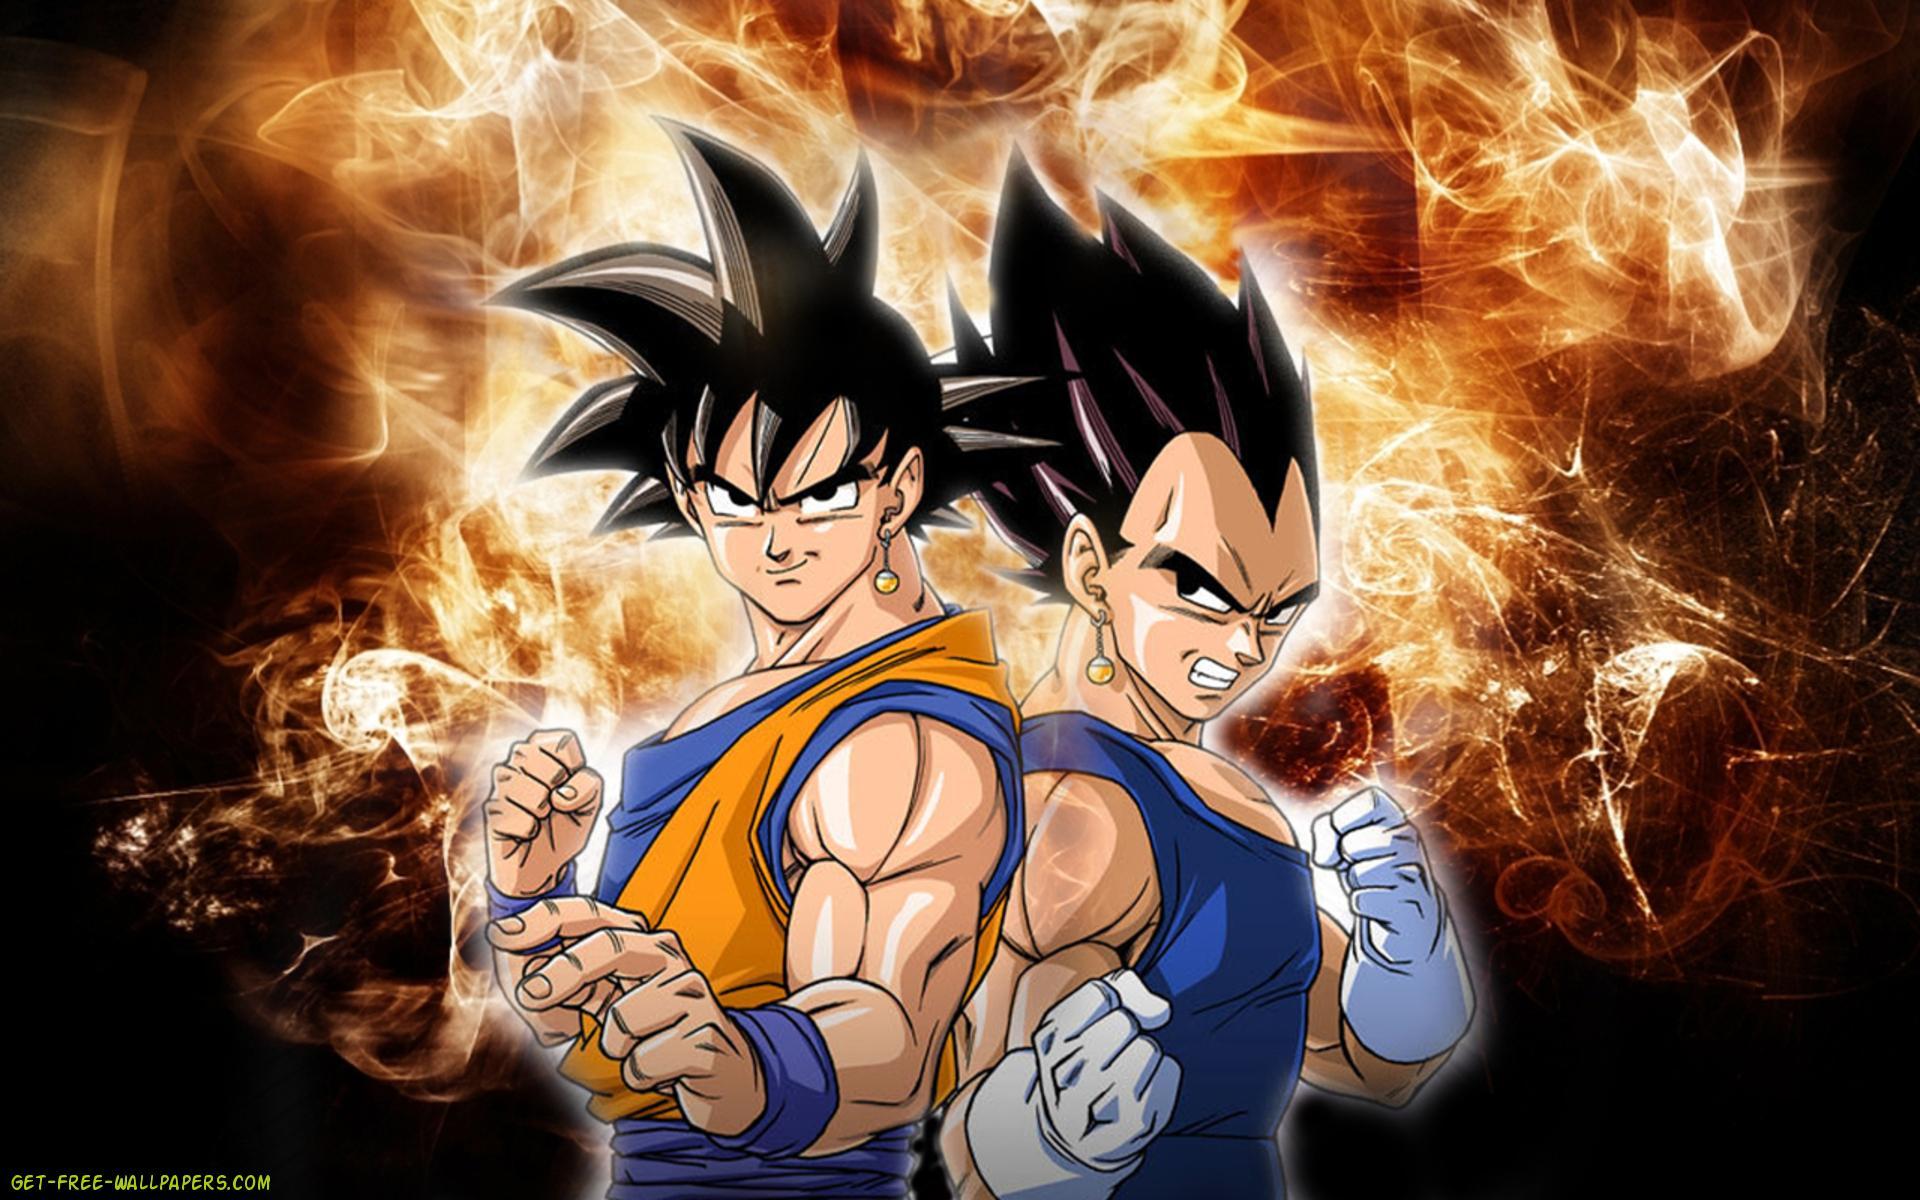 Vegeta Dragon Ball Cool Wallpaper, HD Anime 4K Wallpapers, Images and  Background - Wallpapers Den